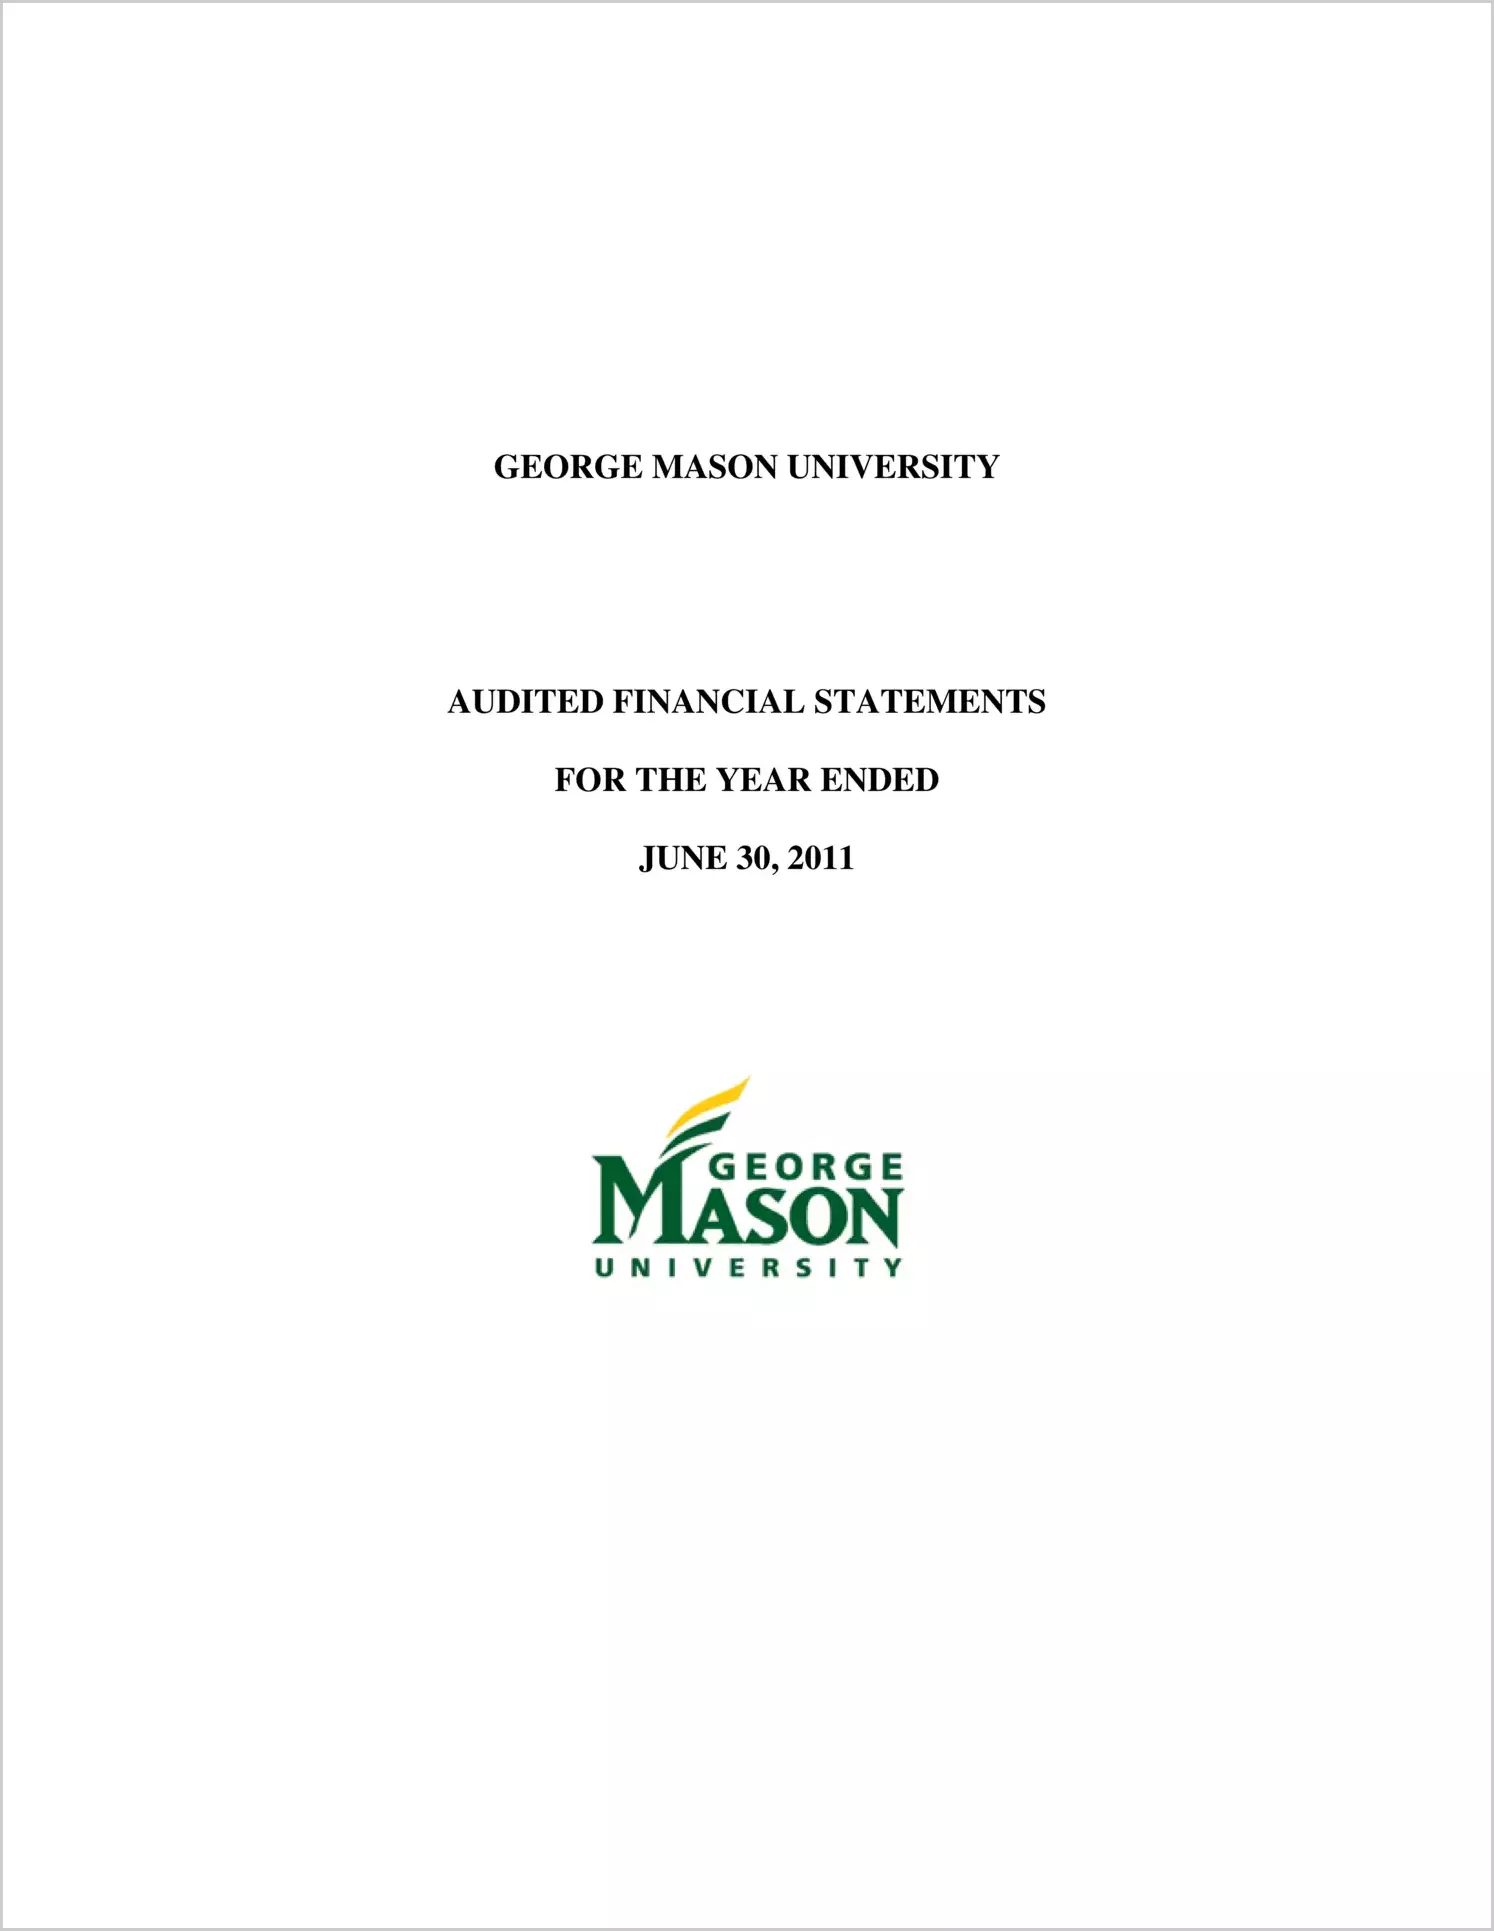 George Mason University Financial Statements for the year ended June 30, 2011